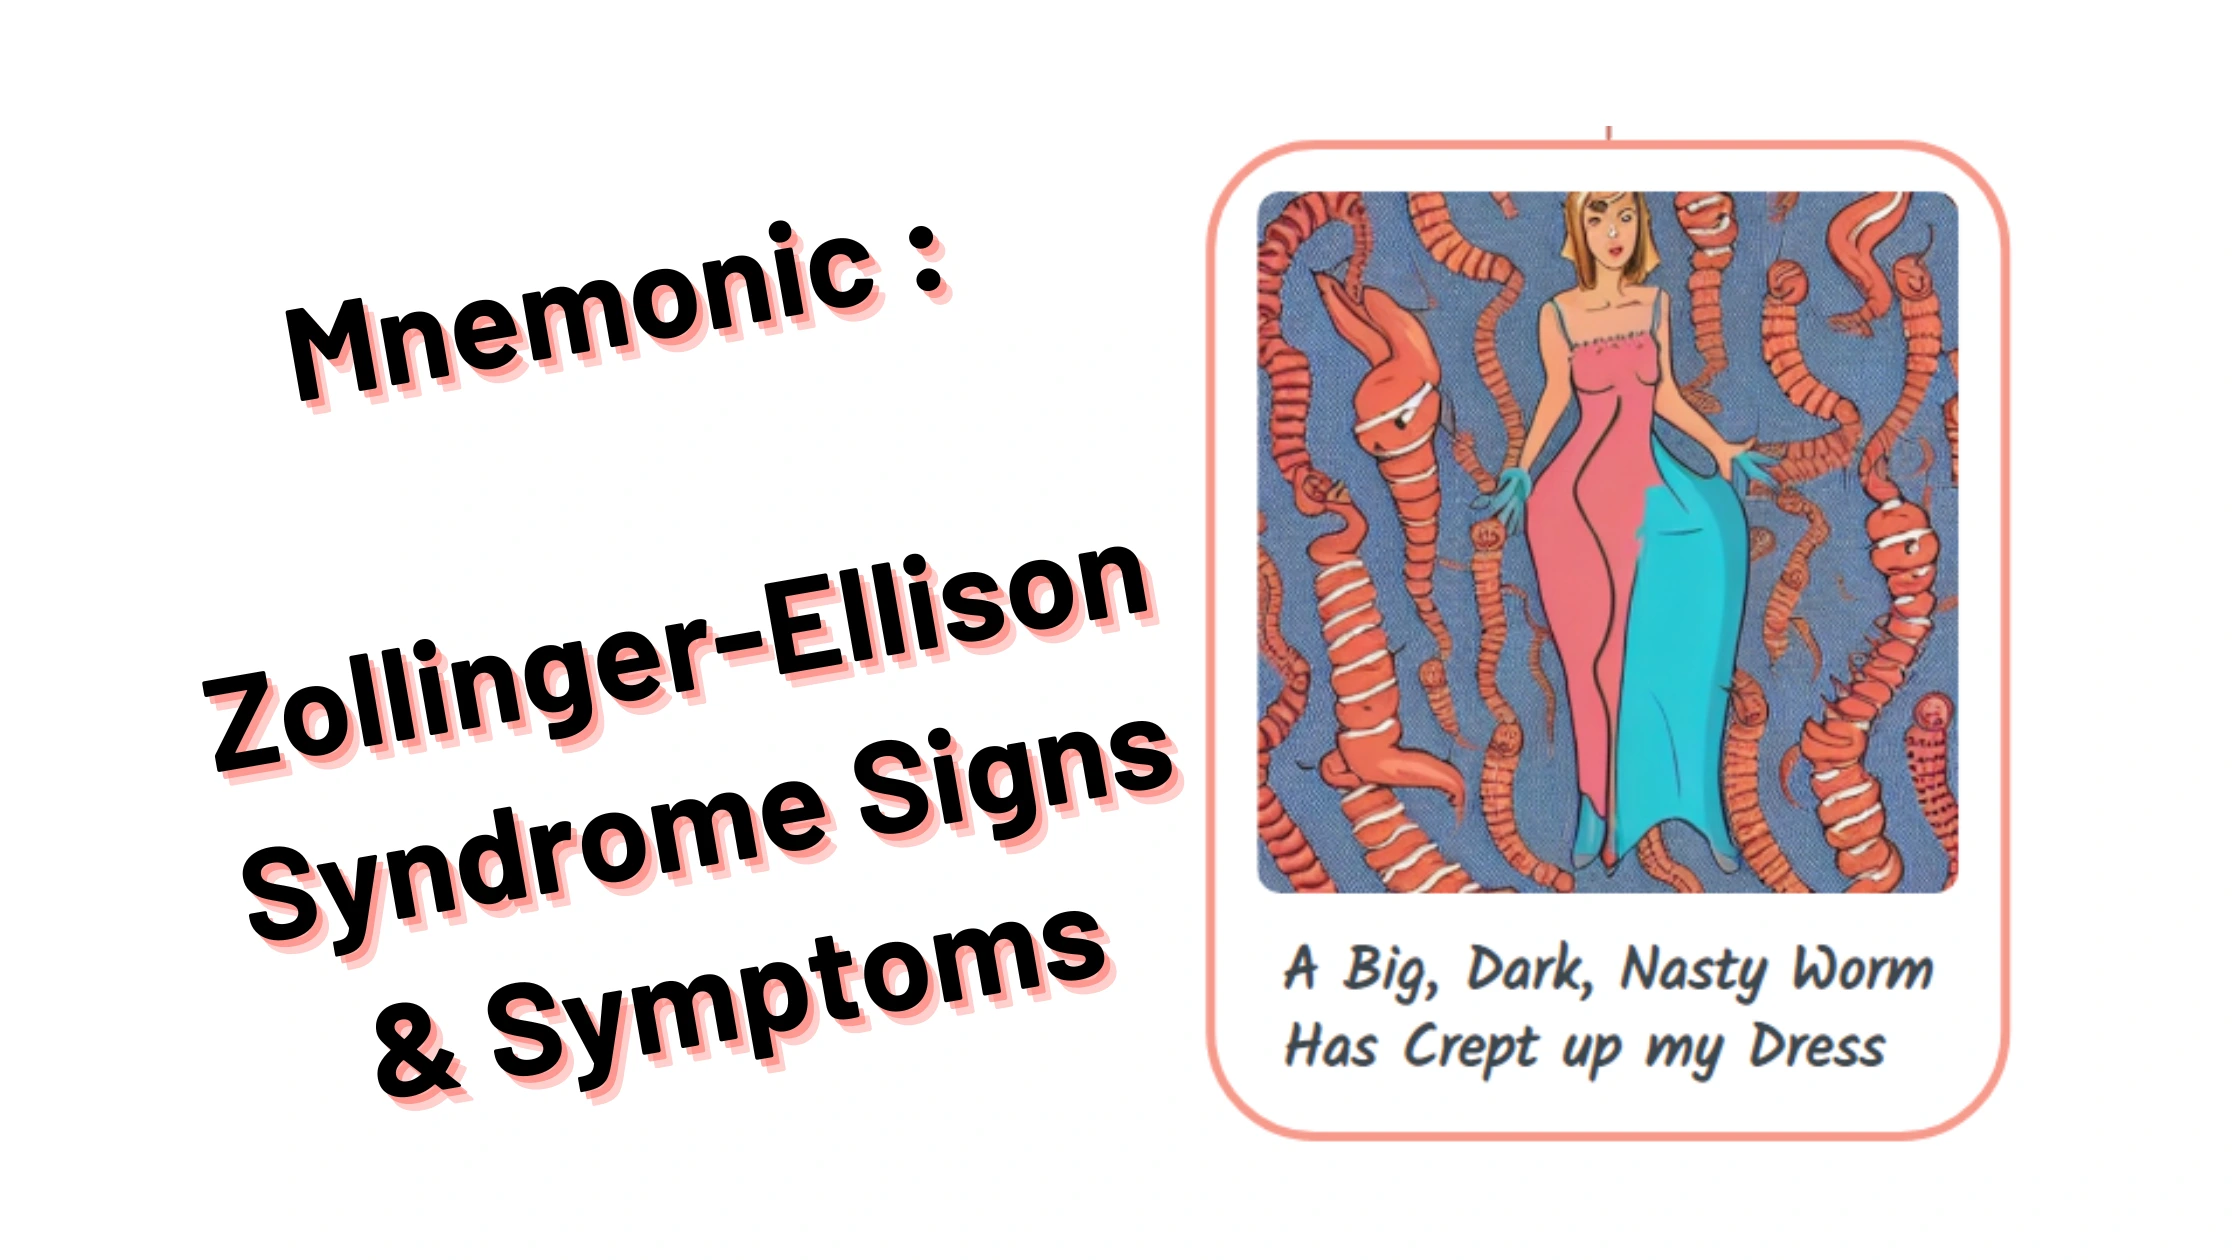 You are currently viewing [Very Cool] Mnemonic : Zollinger-Ellison Syndrome Signs & Symptoms